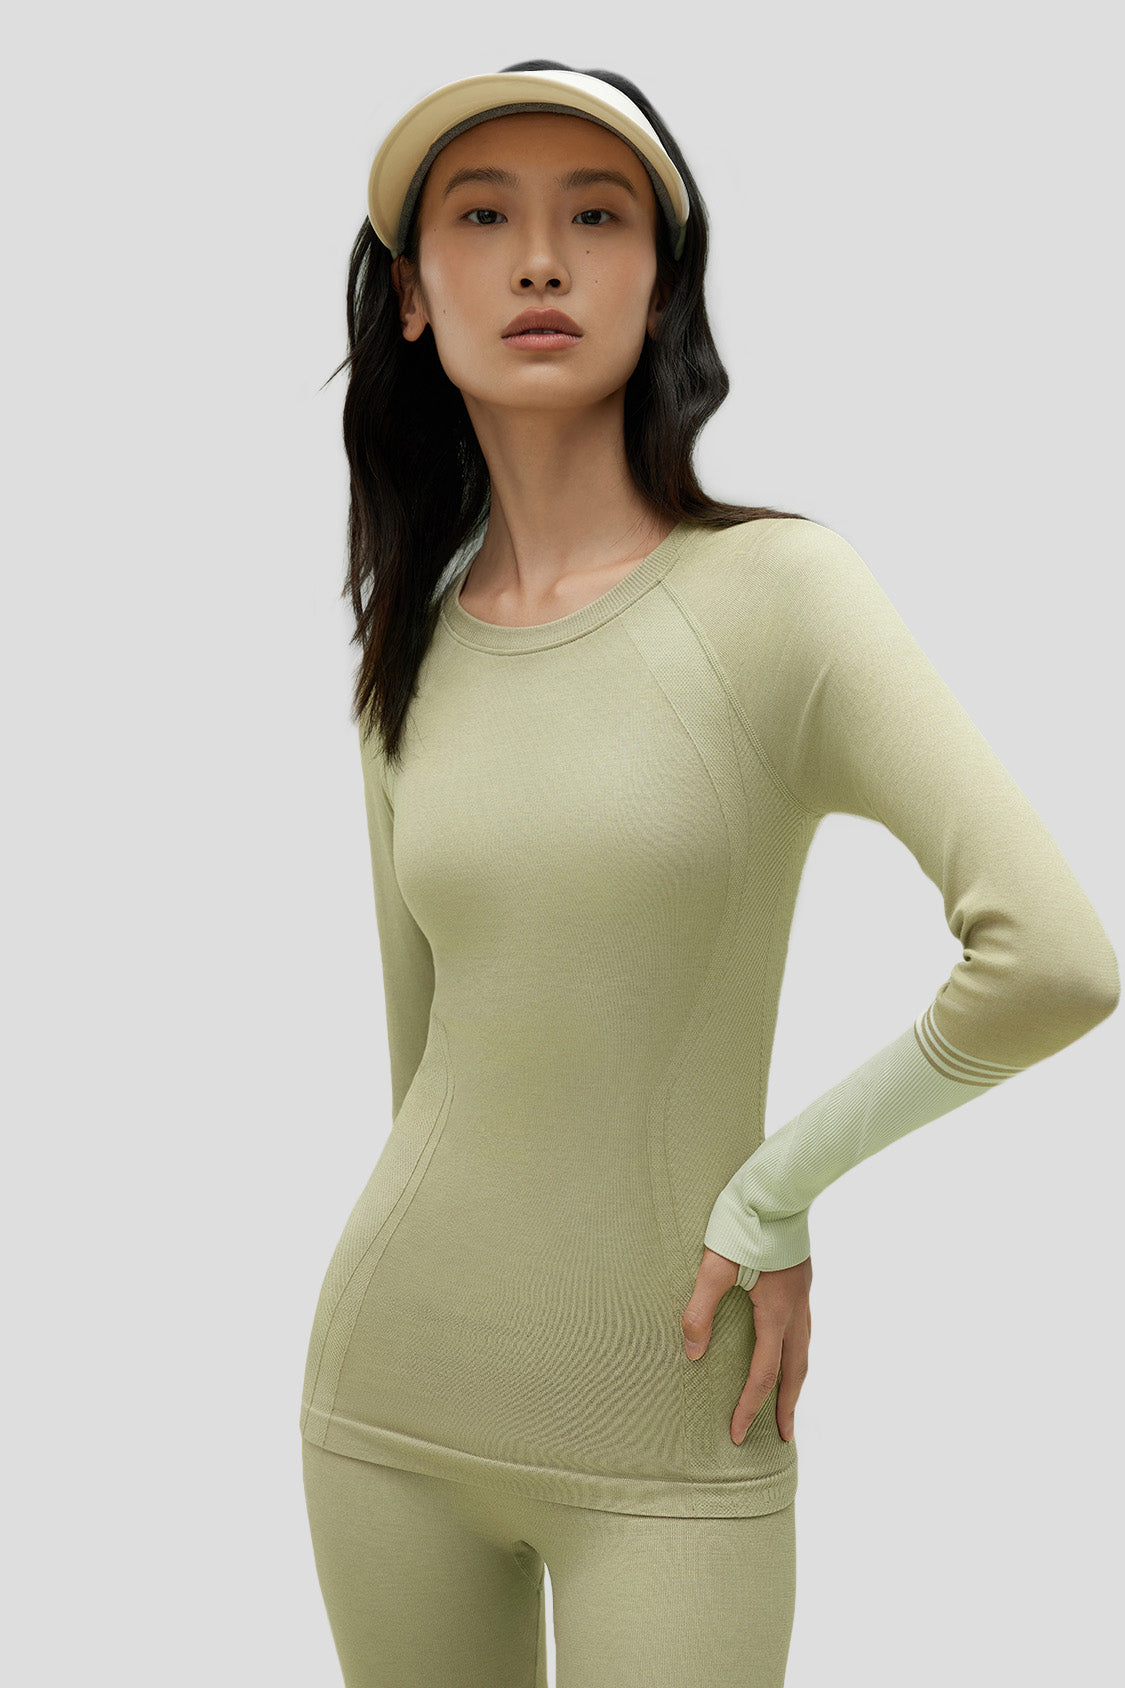 2021 Newest Hot Sexy Women Winter Seamless Elastic Thermal Inner